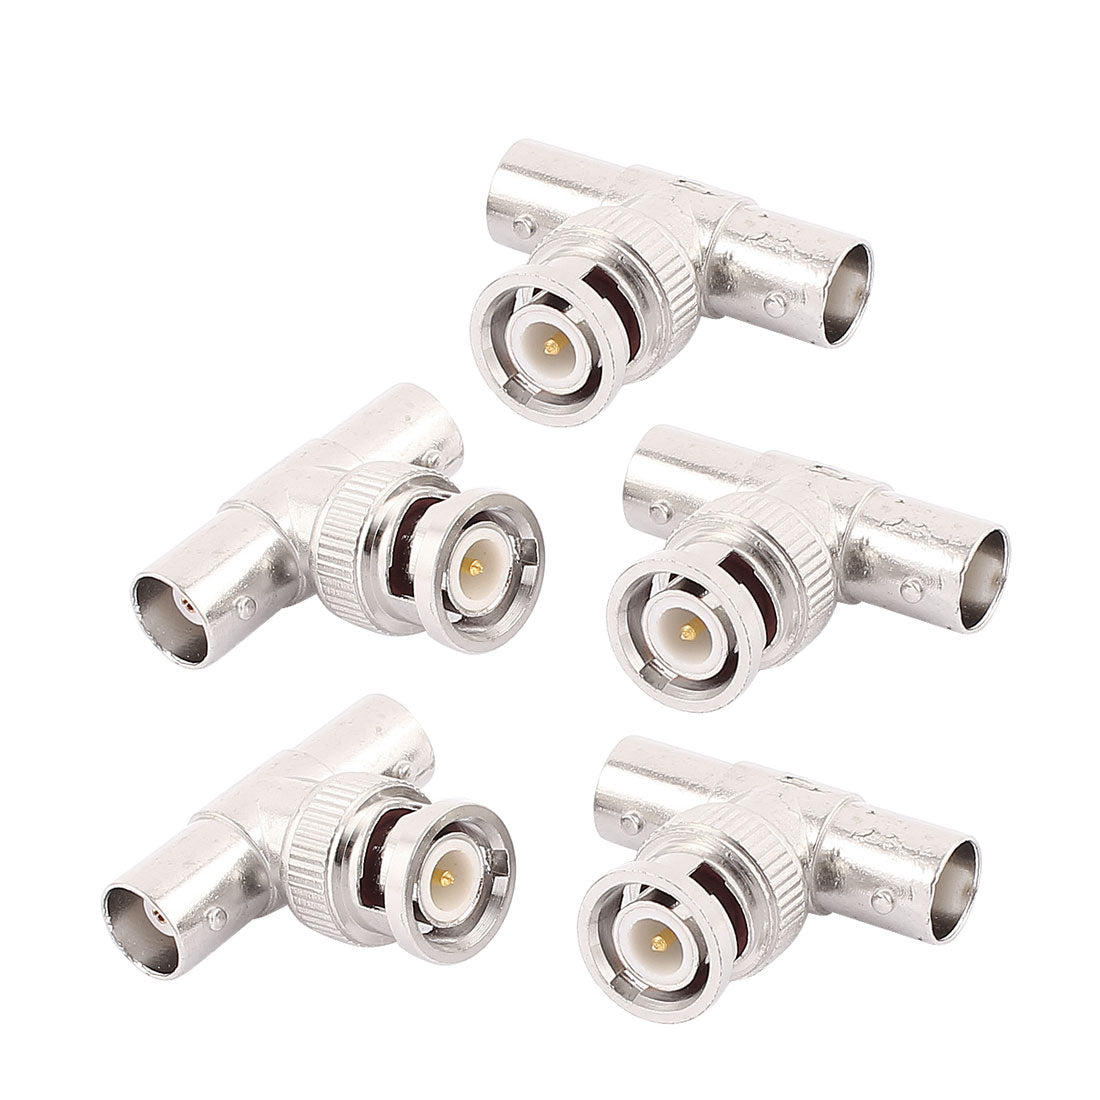 uxcell Uxcell 5 Pcs BNC Q9 3 Way T Connector 1 Male to 2 Female Video Adaptor For CCTV Camera